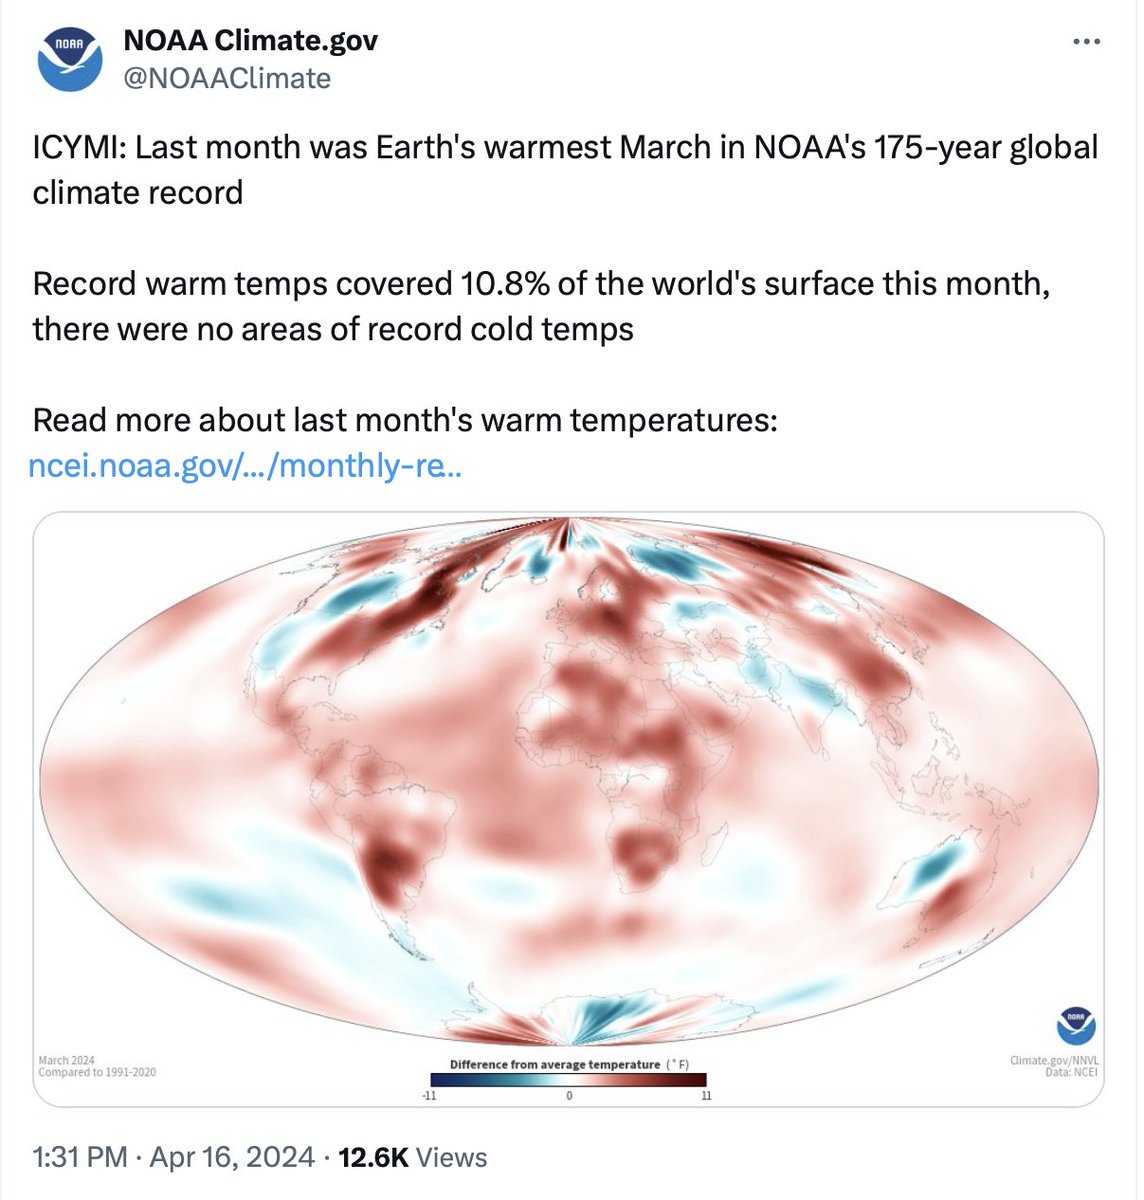 Today's @NOAAClimate lying:

1. NOAA claims March 2024 was the warmest March because it supposedly was 0.01°C warmer than March 2016.

2. But 96% of NOAA's US temperature stations are not sited well and not accurate to with 1°C -- two orders of magnitude larger than the claimed…